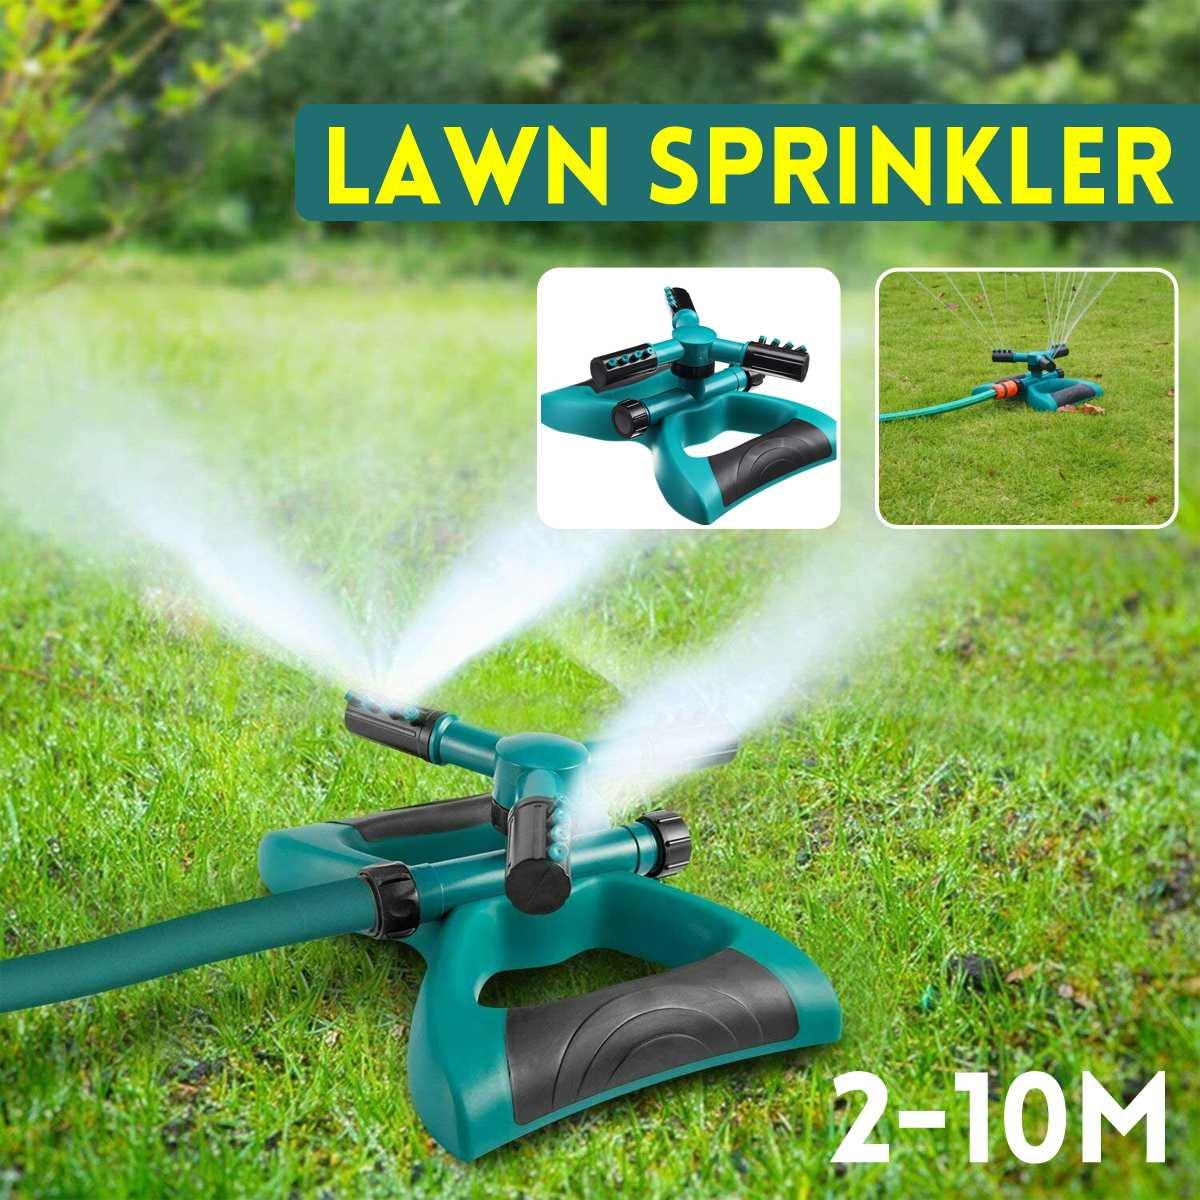 360° Rotating Automatic Water Sprinkler System - 200007763:201336100